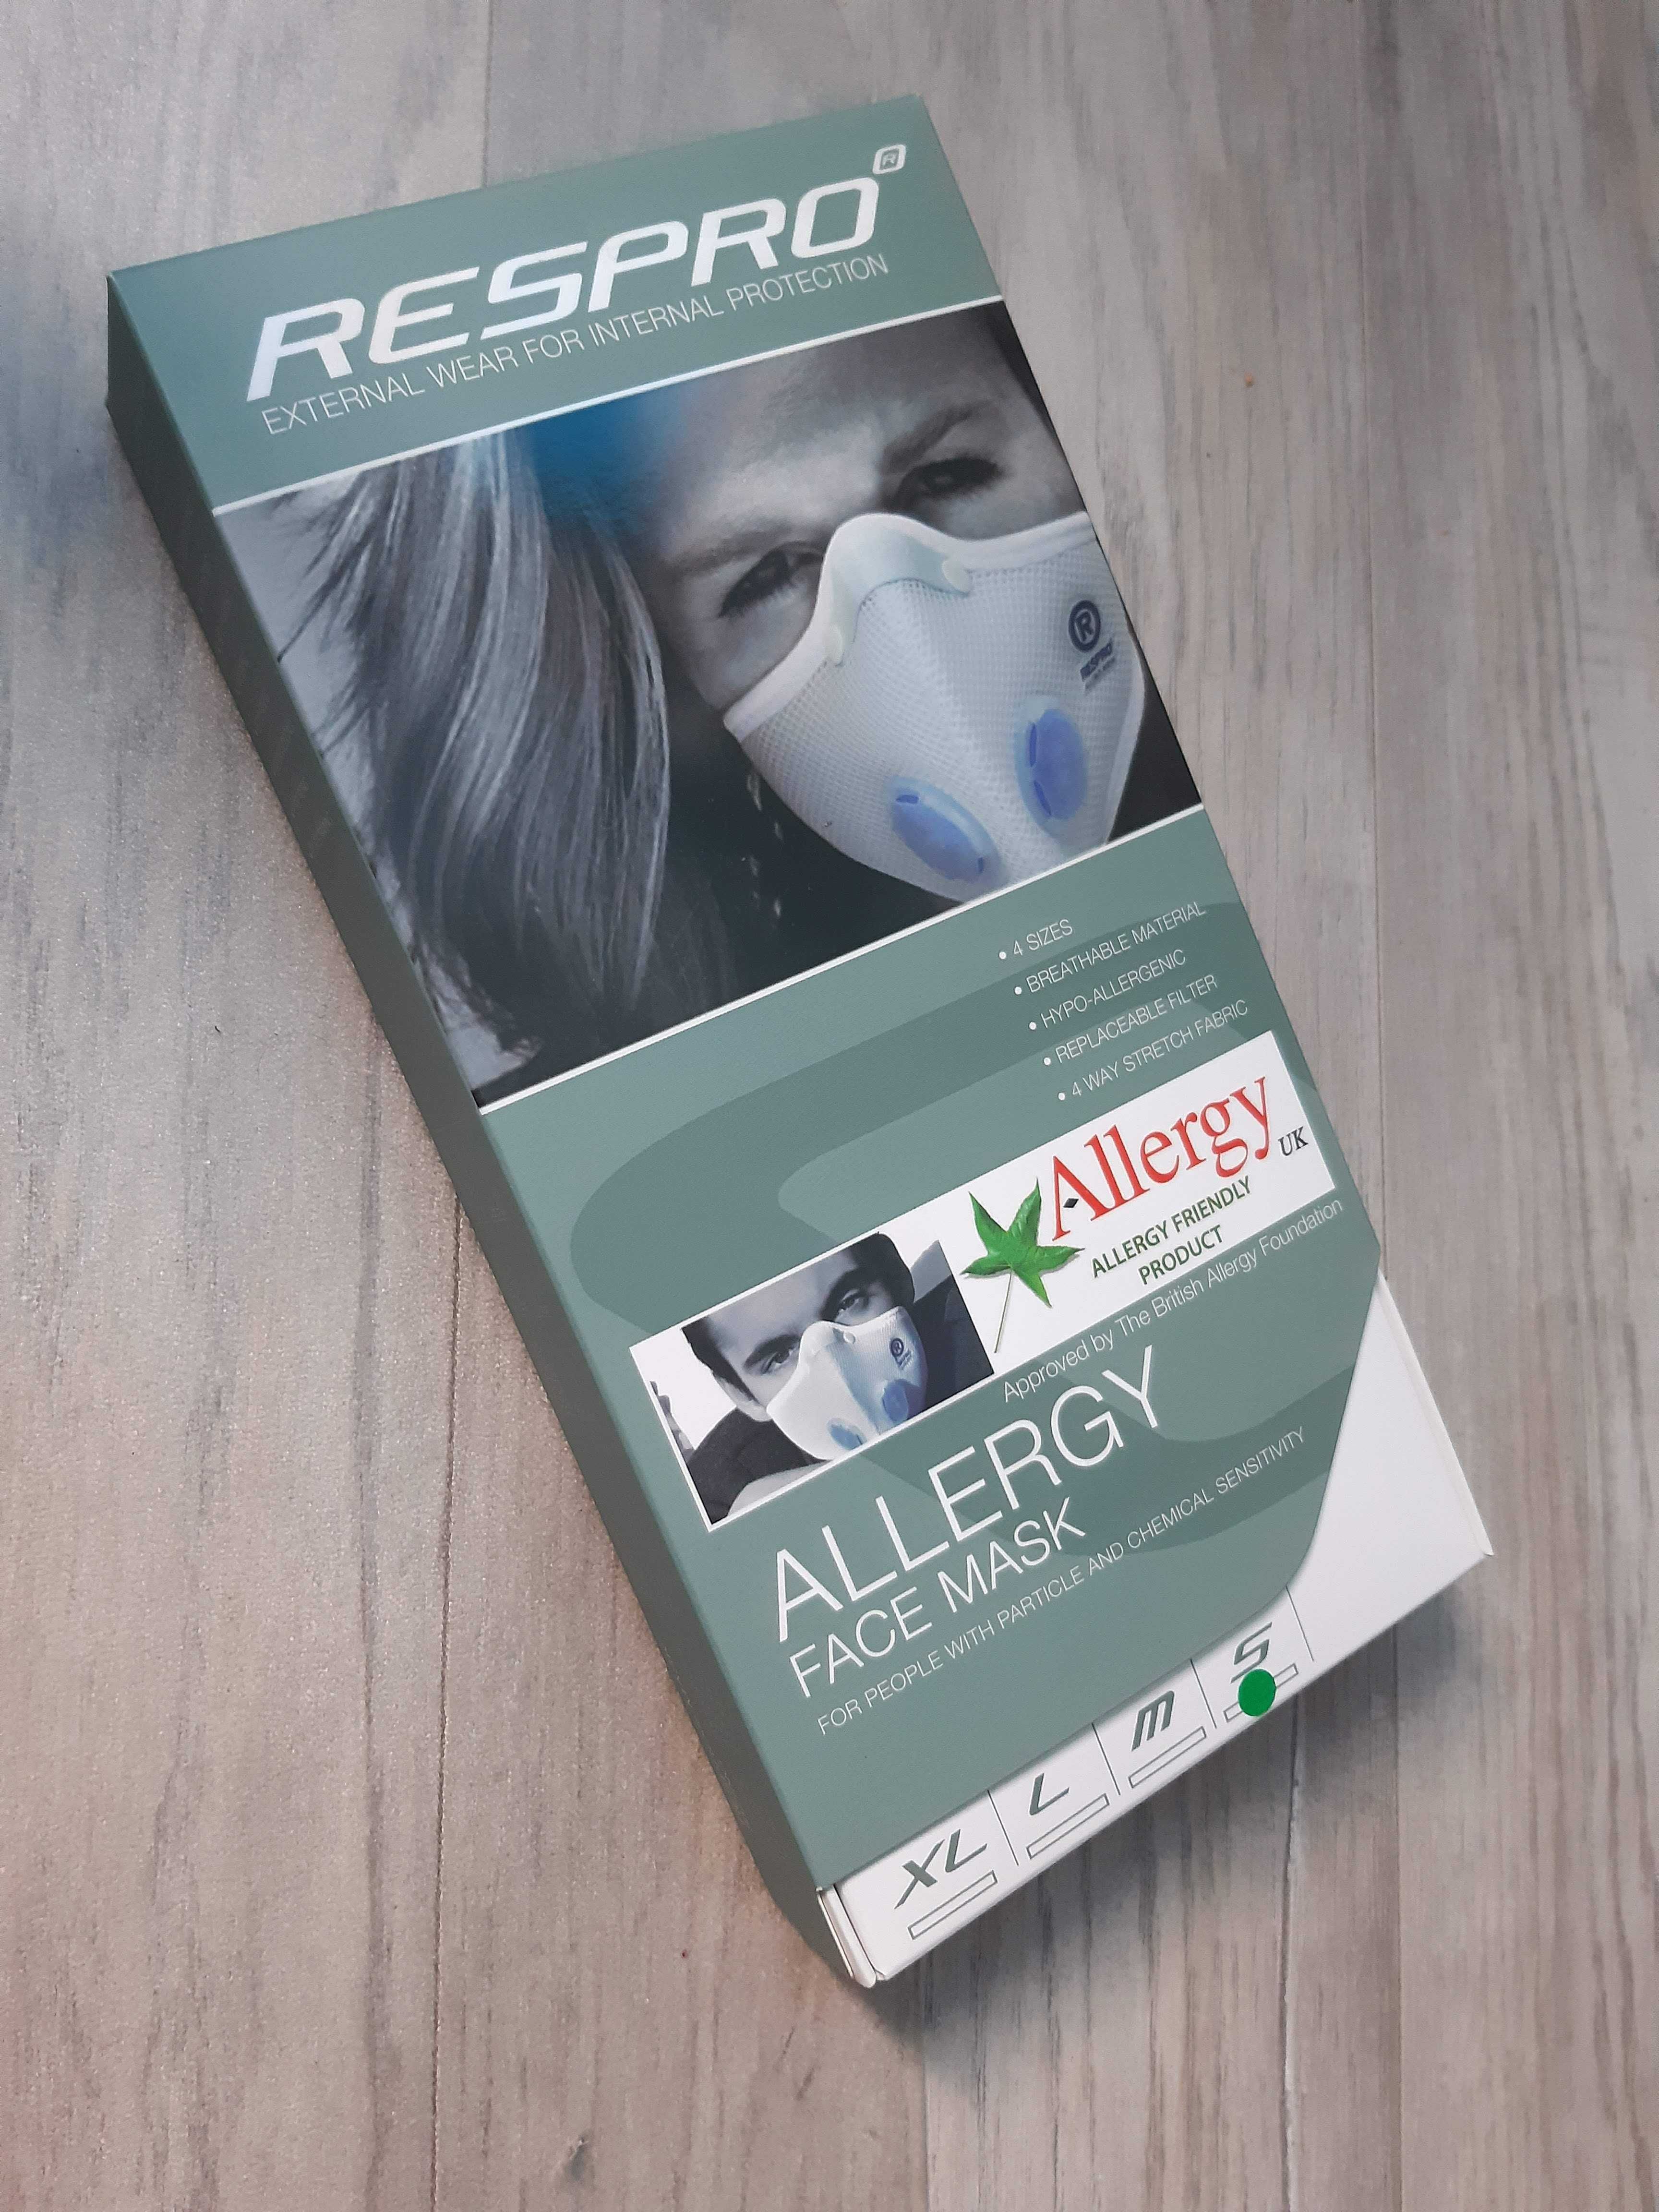 Respro Allergy masca anti poluare protecție microparticule